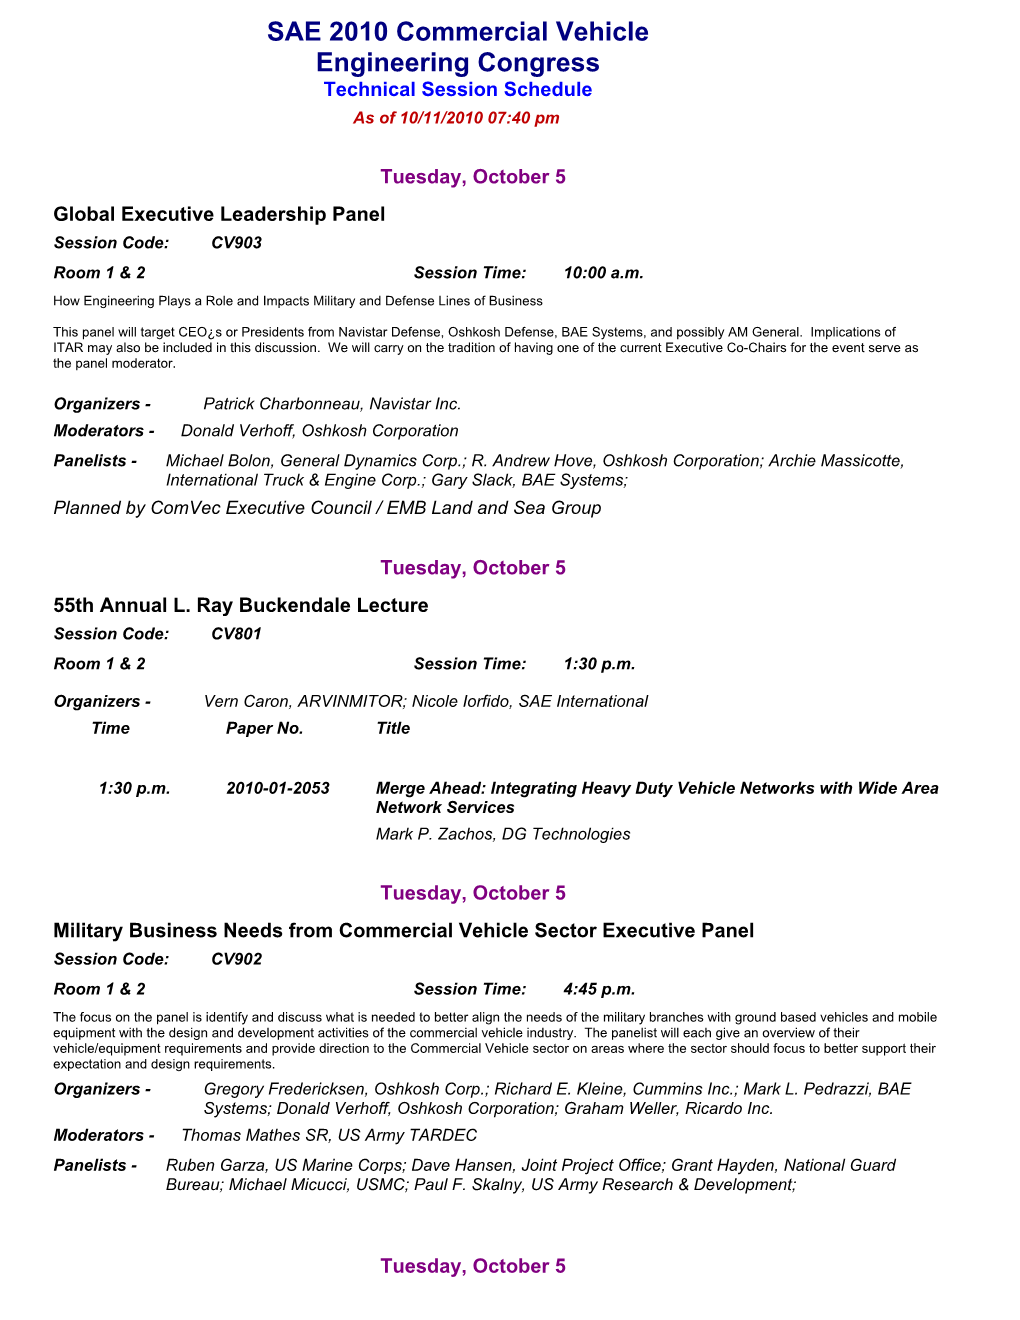 SAE 2010 Commercial Vehicle Engineering Congress Technical Session Schedule As of 10/11/2010 07:40 Pm